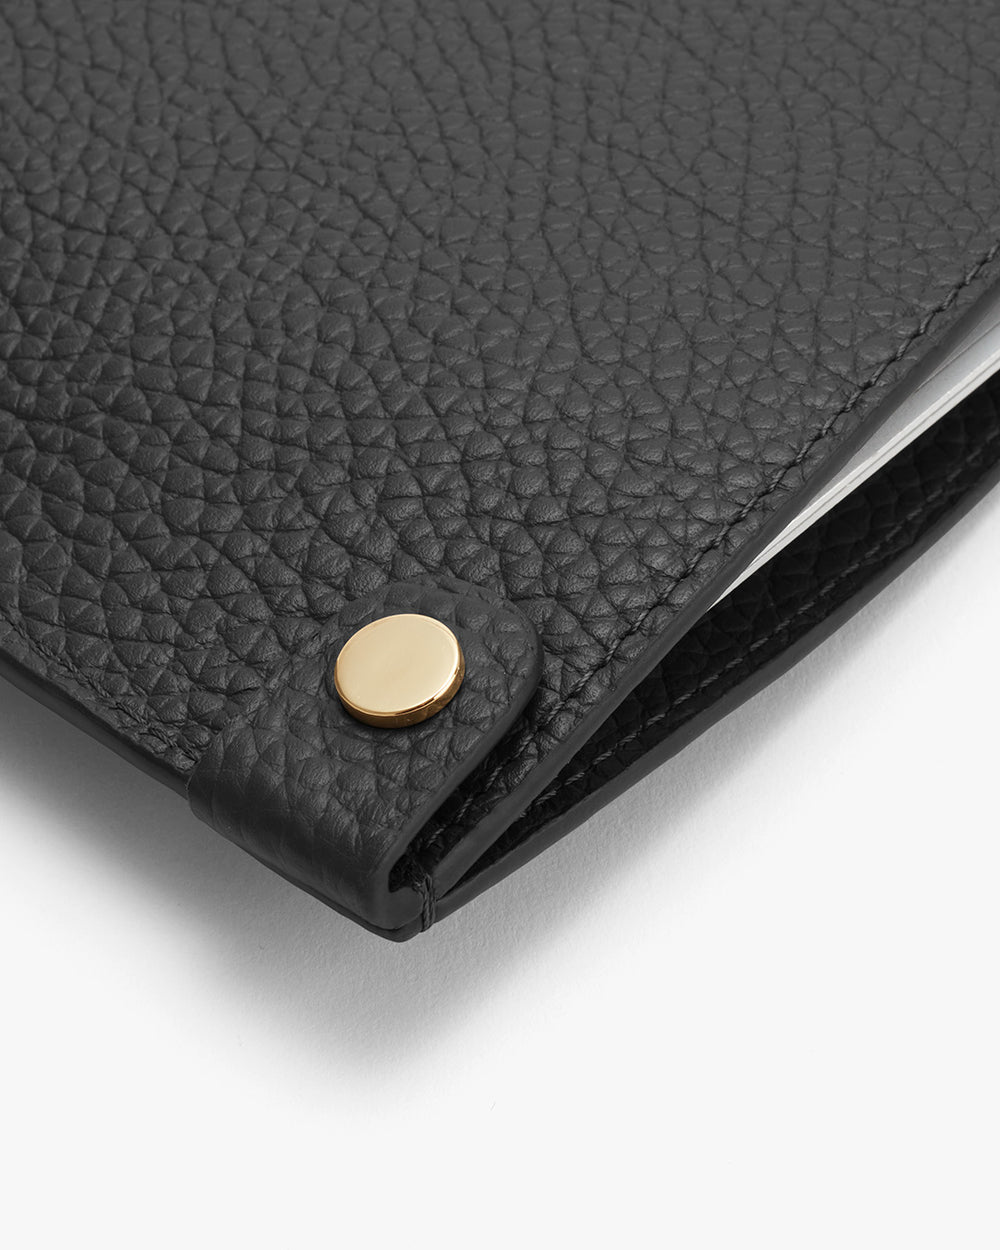 Close-up of a textured clutch with a circular clasp.